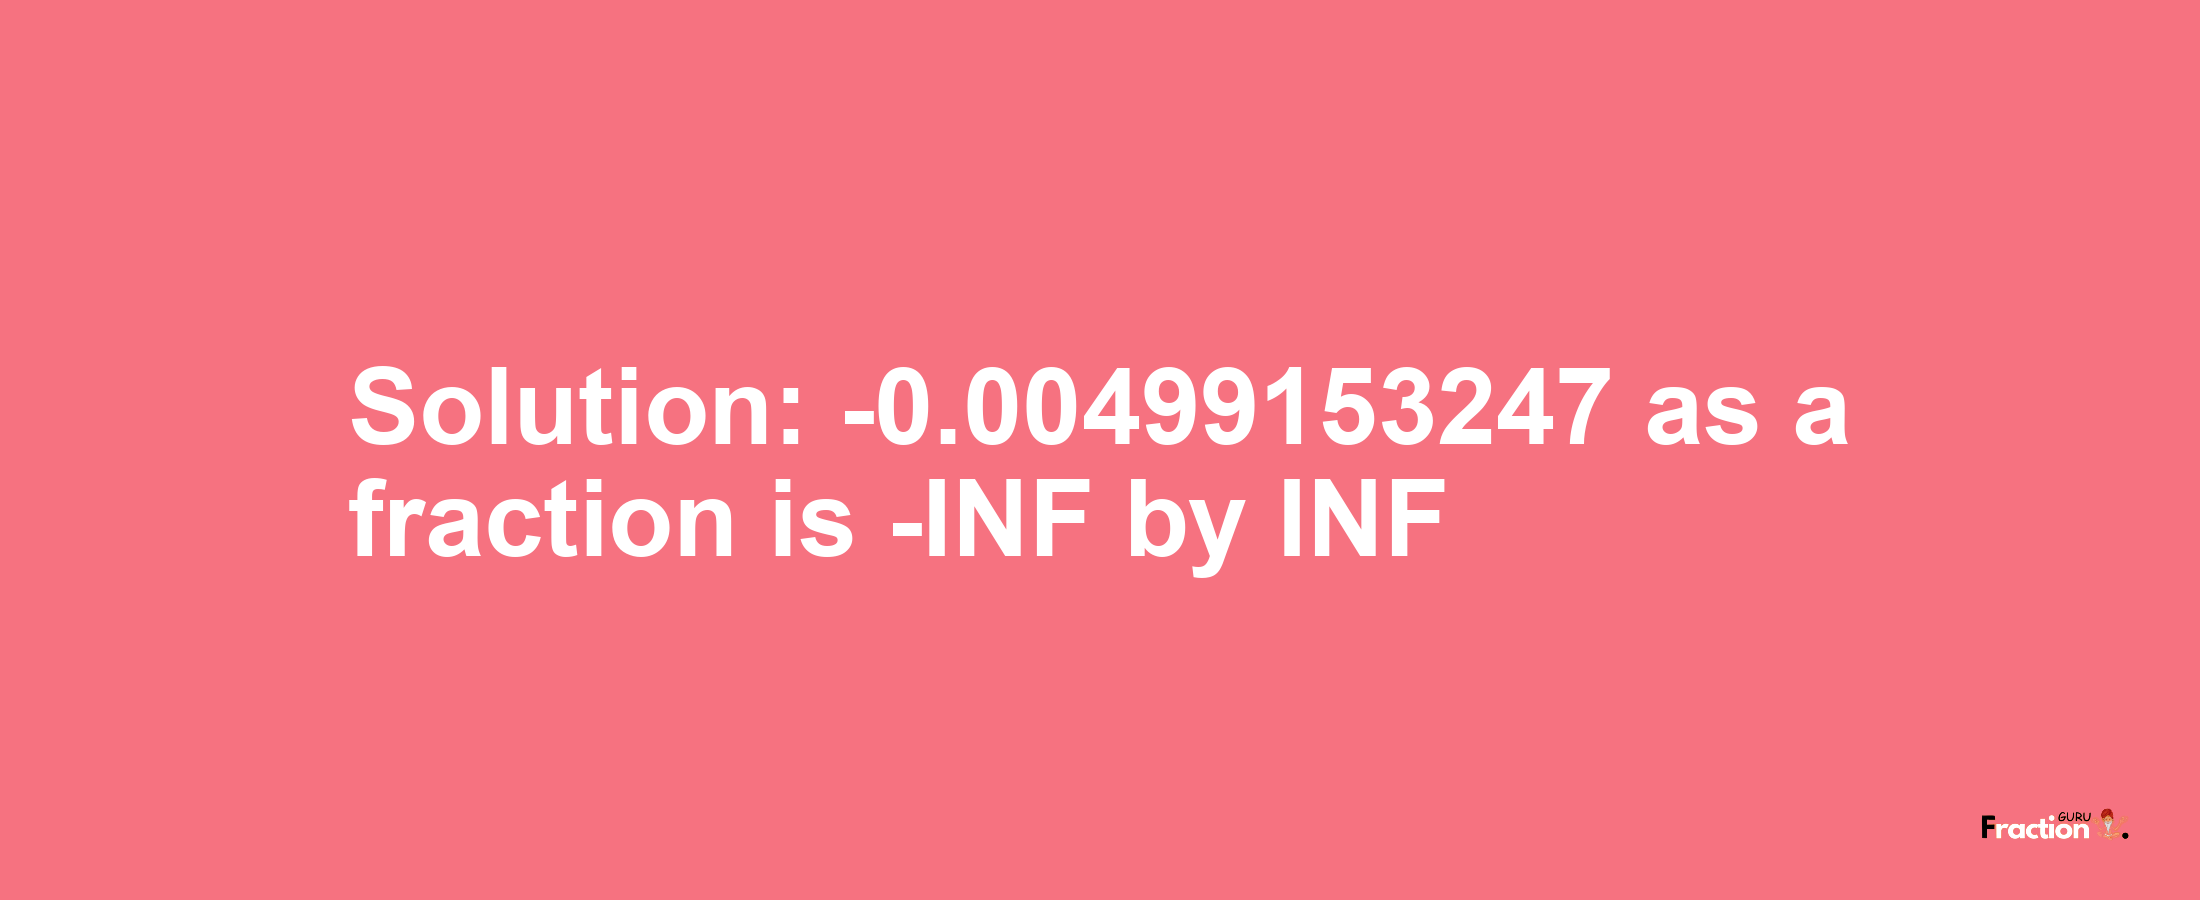 Solution:-0.00499153247 as a fraction is -INF/INF